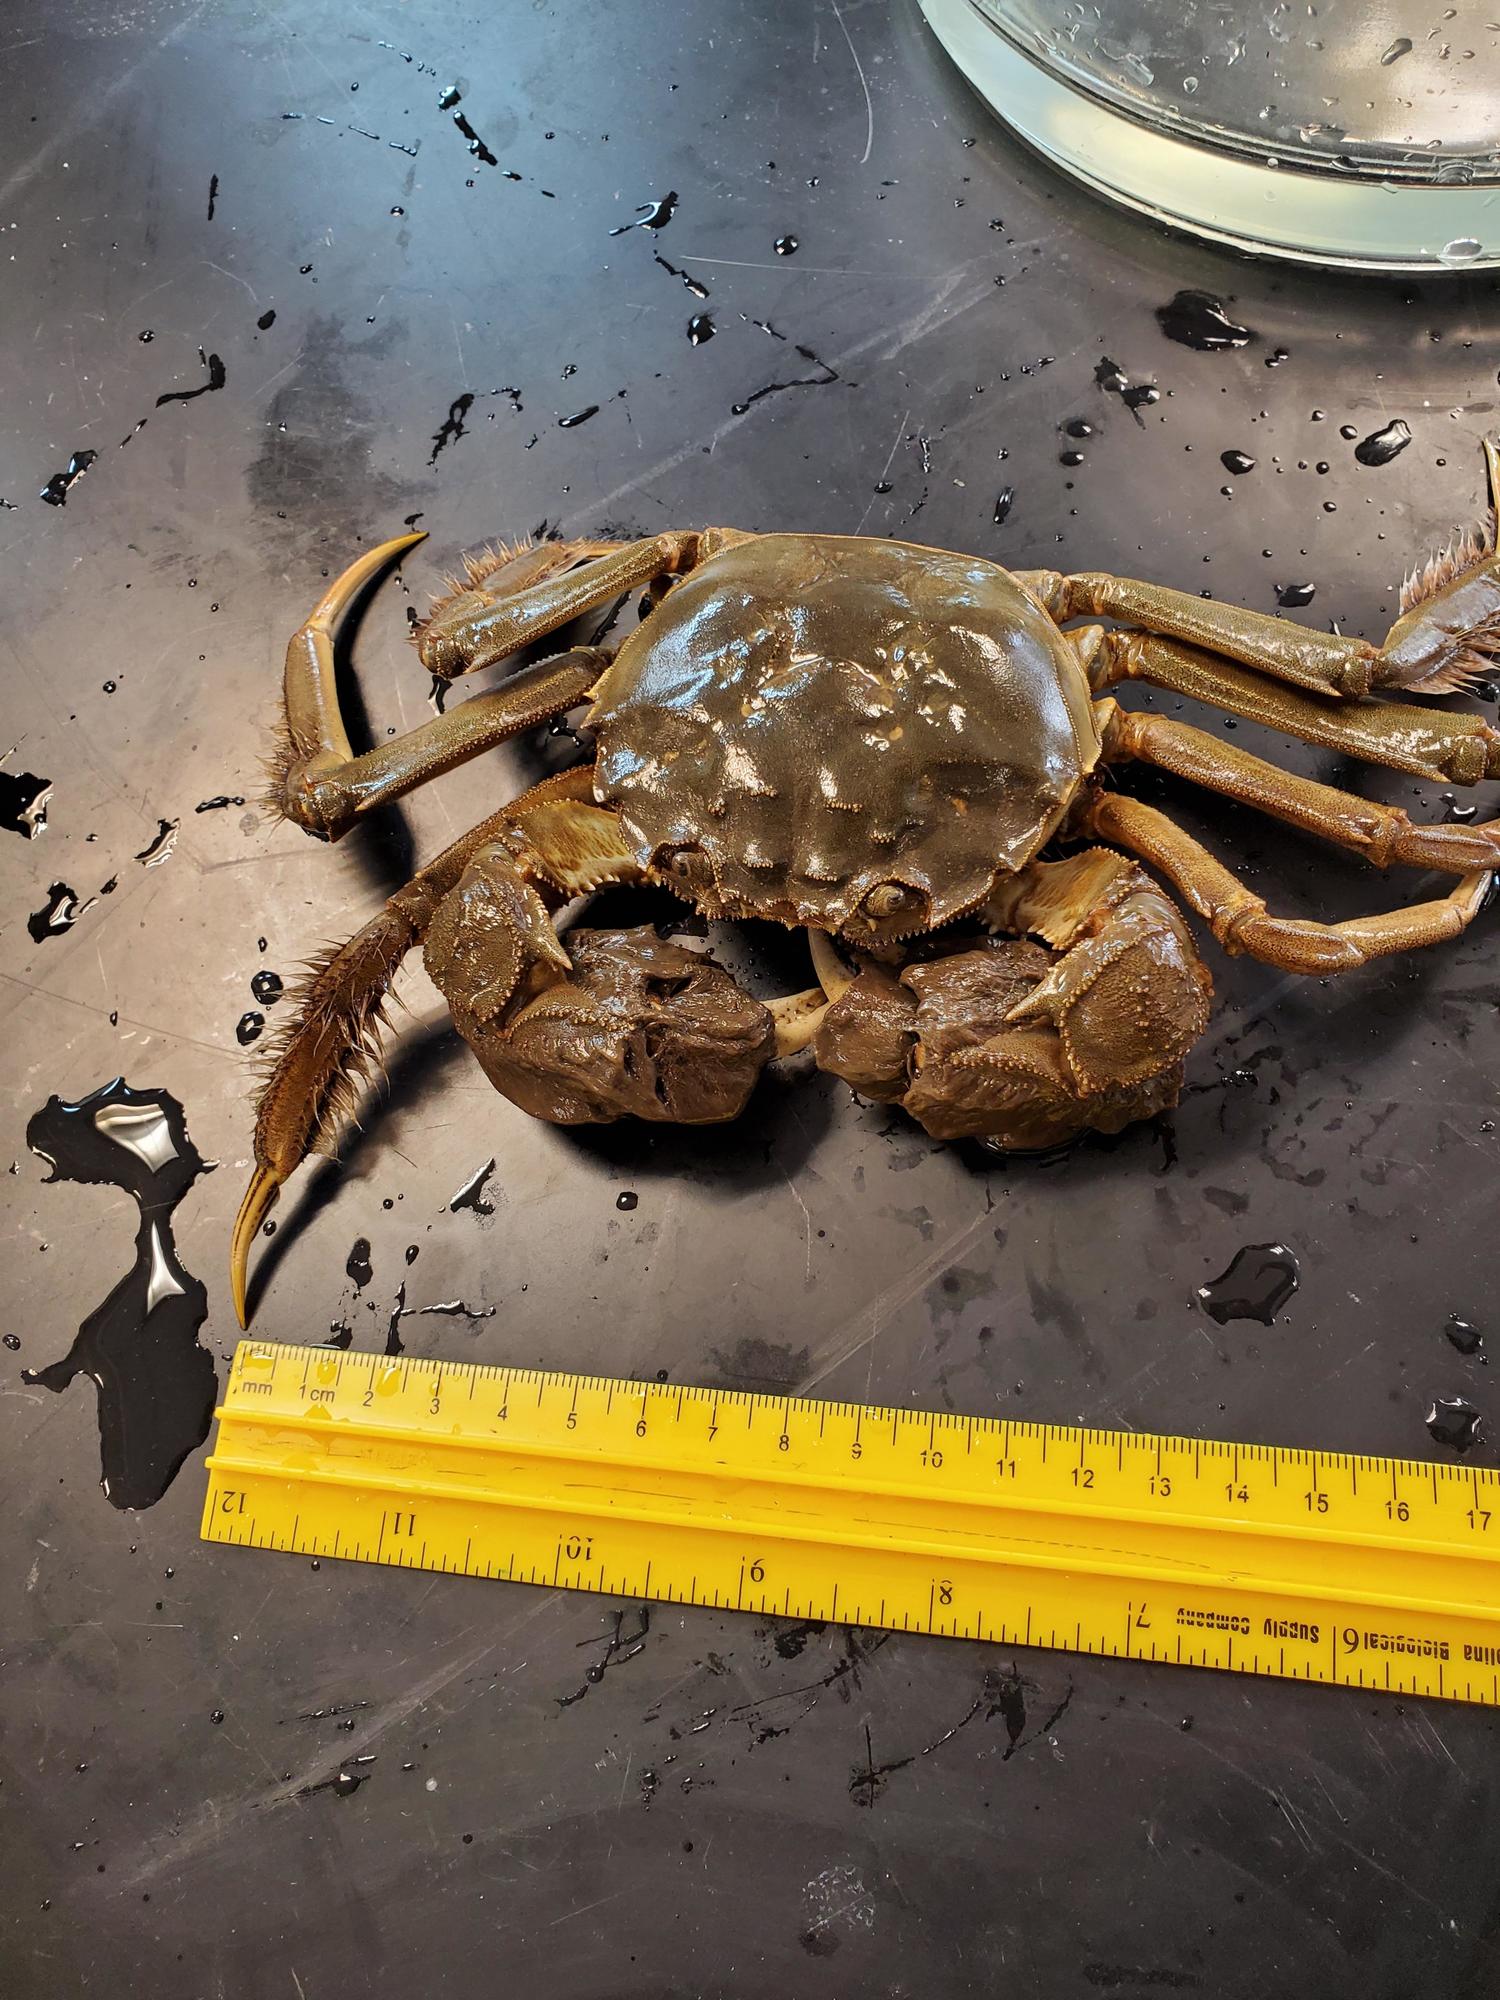 Image of mitten crab with ruler to show size